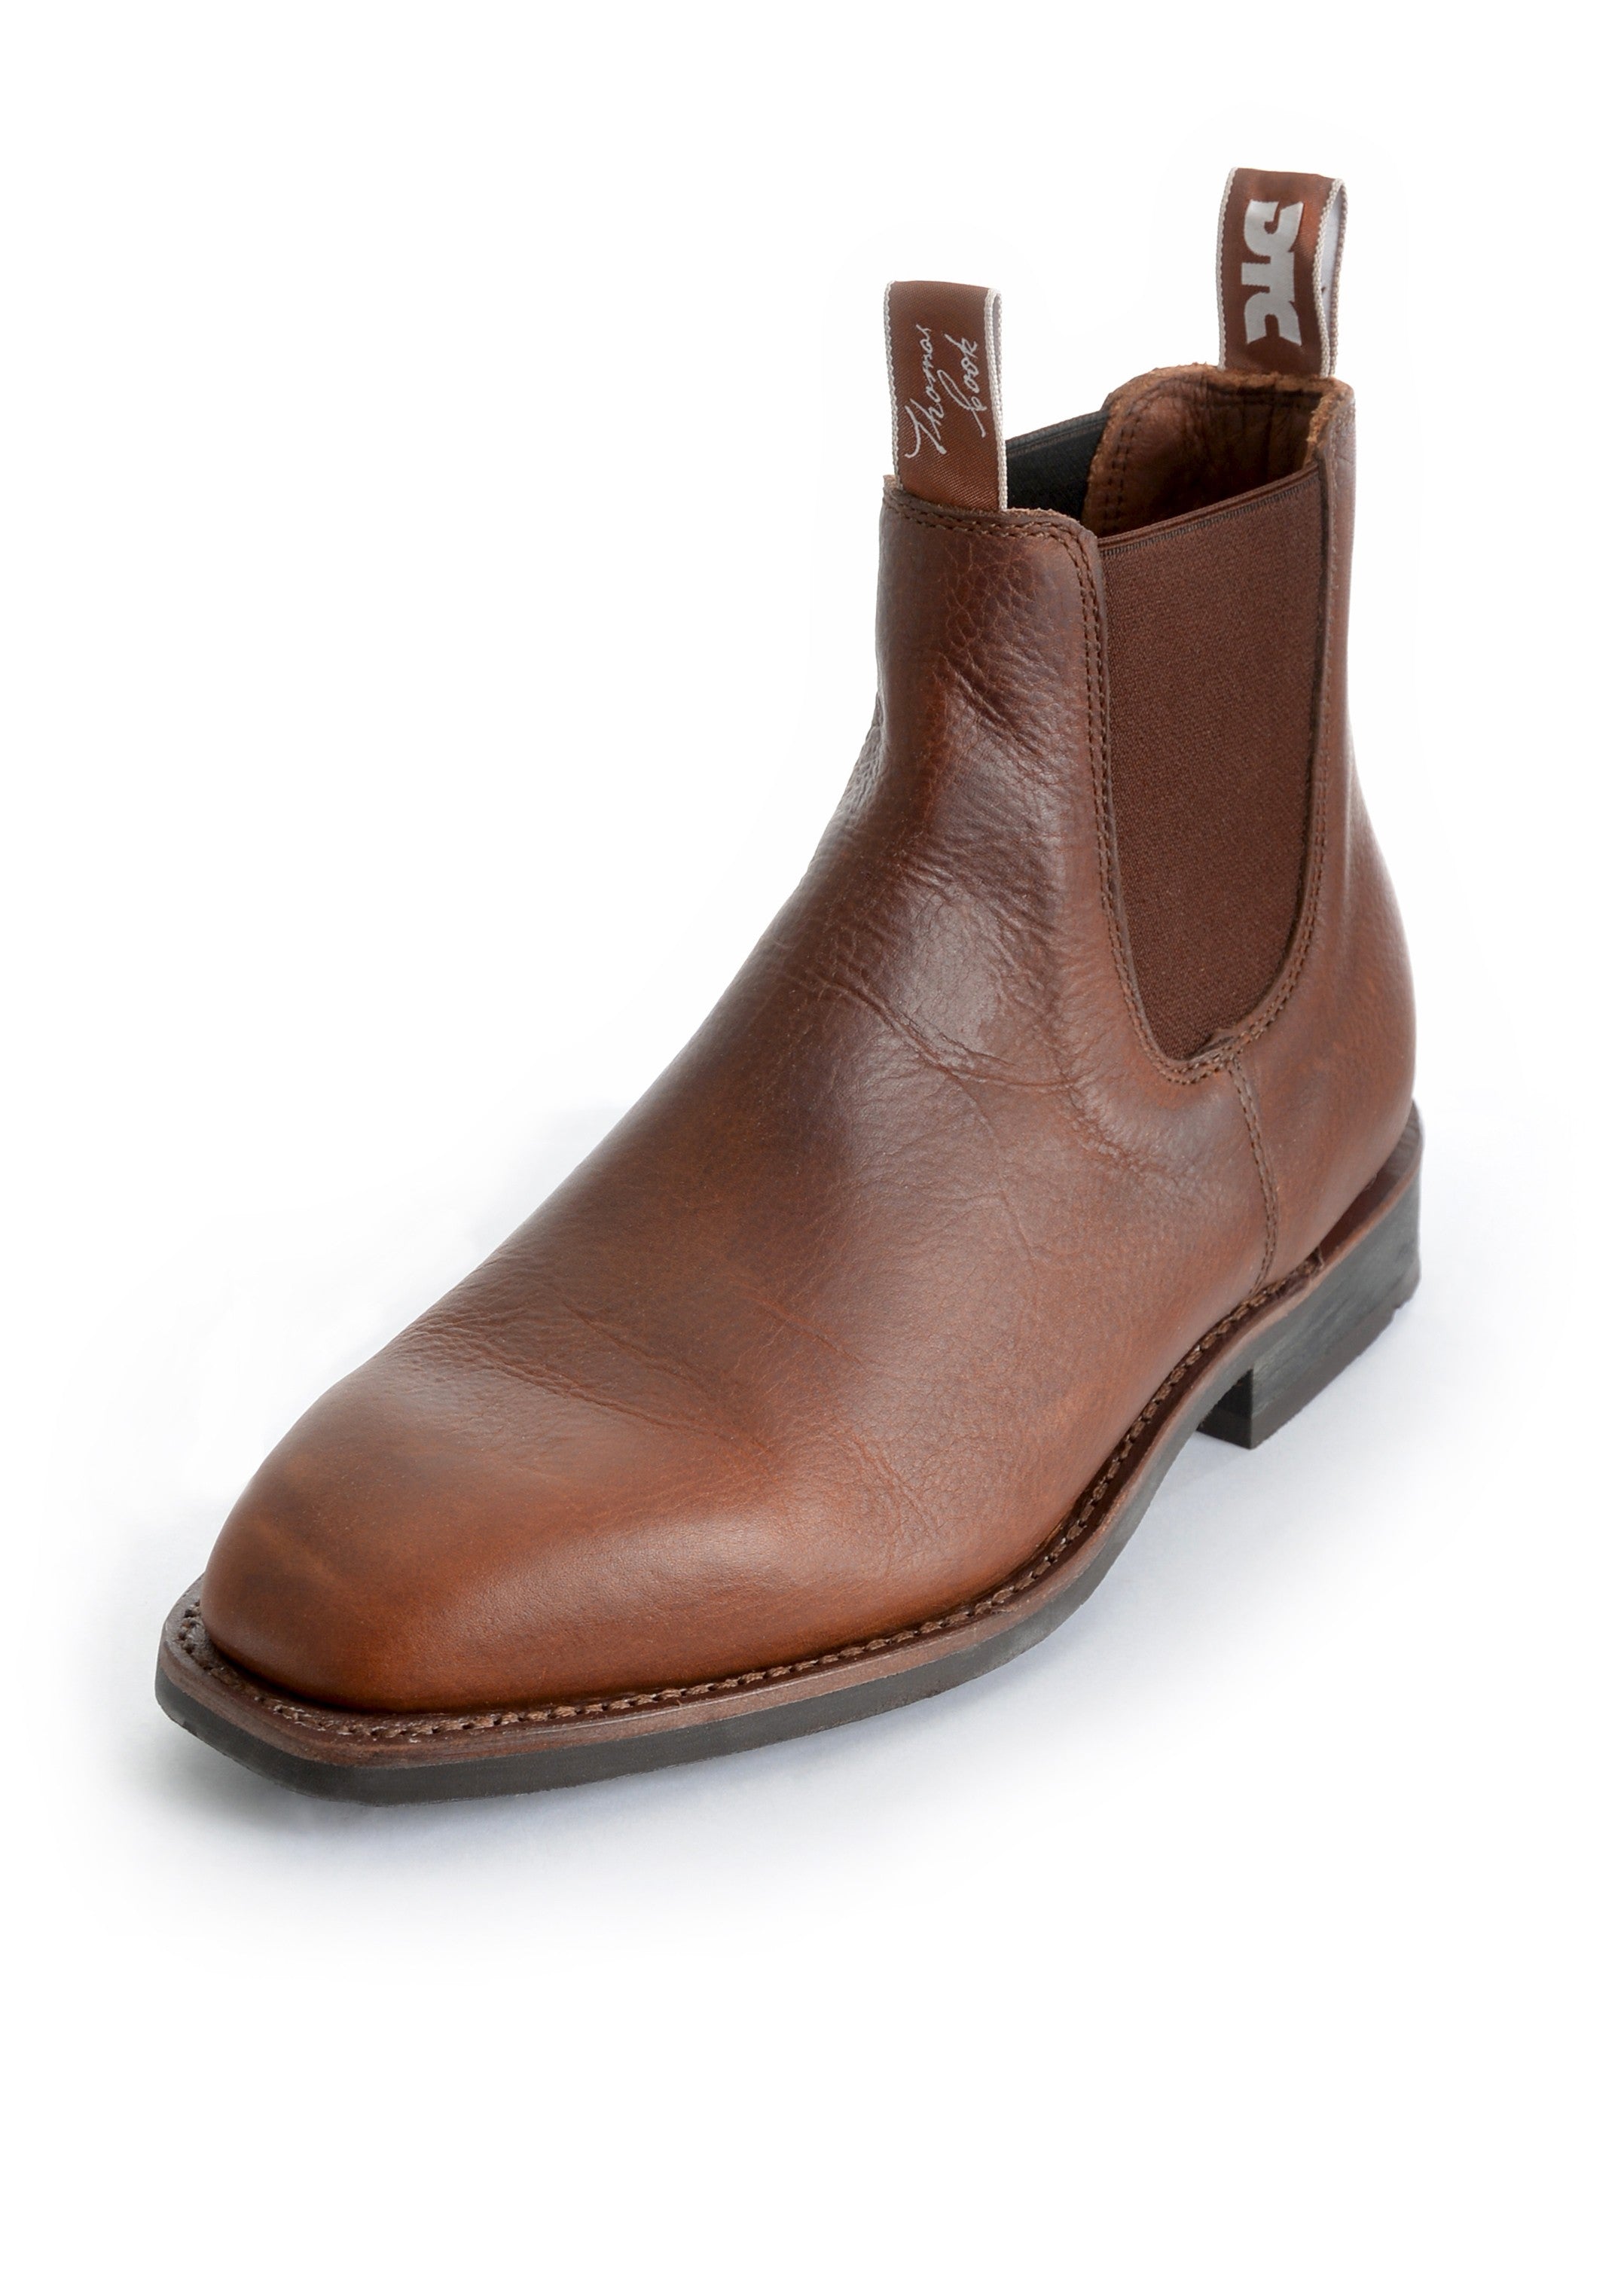 Thomas Cook | Mens | Boots | Dress | Duramax DTC Classic | Brown Coachman - BK8 Outfitters Australia